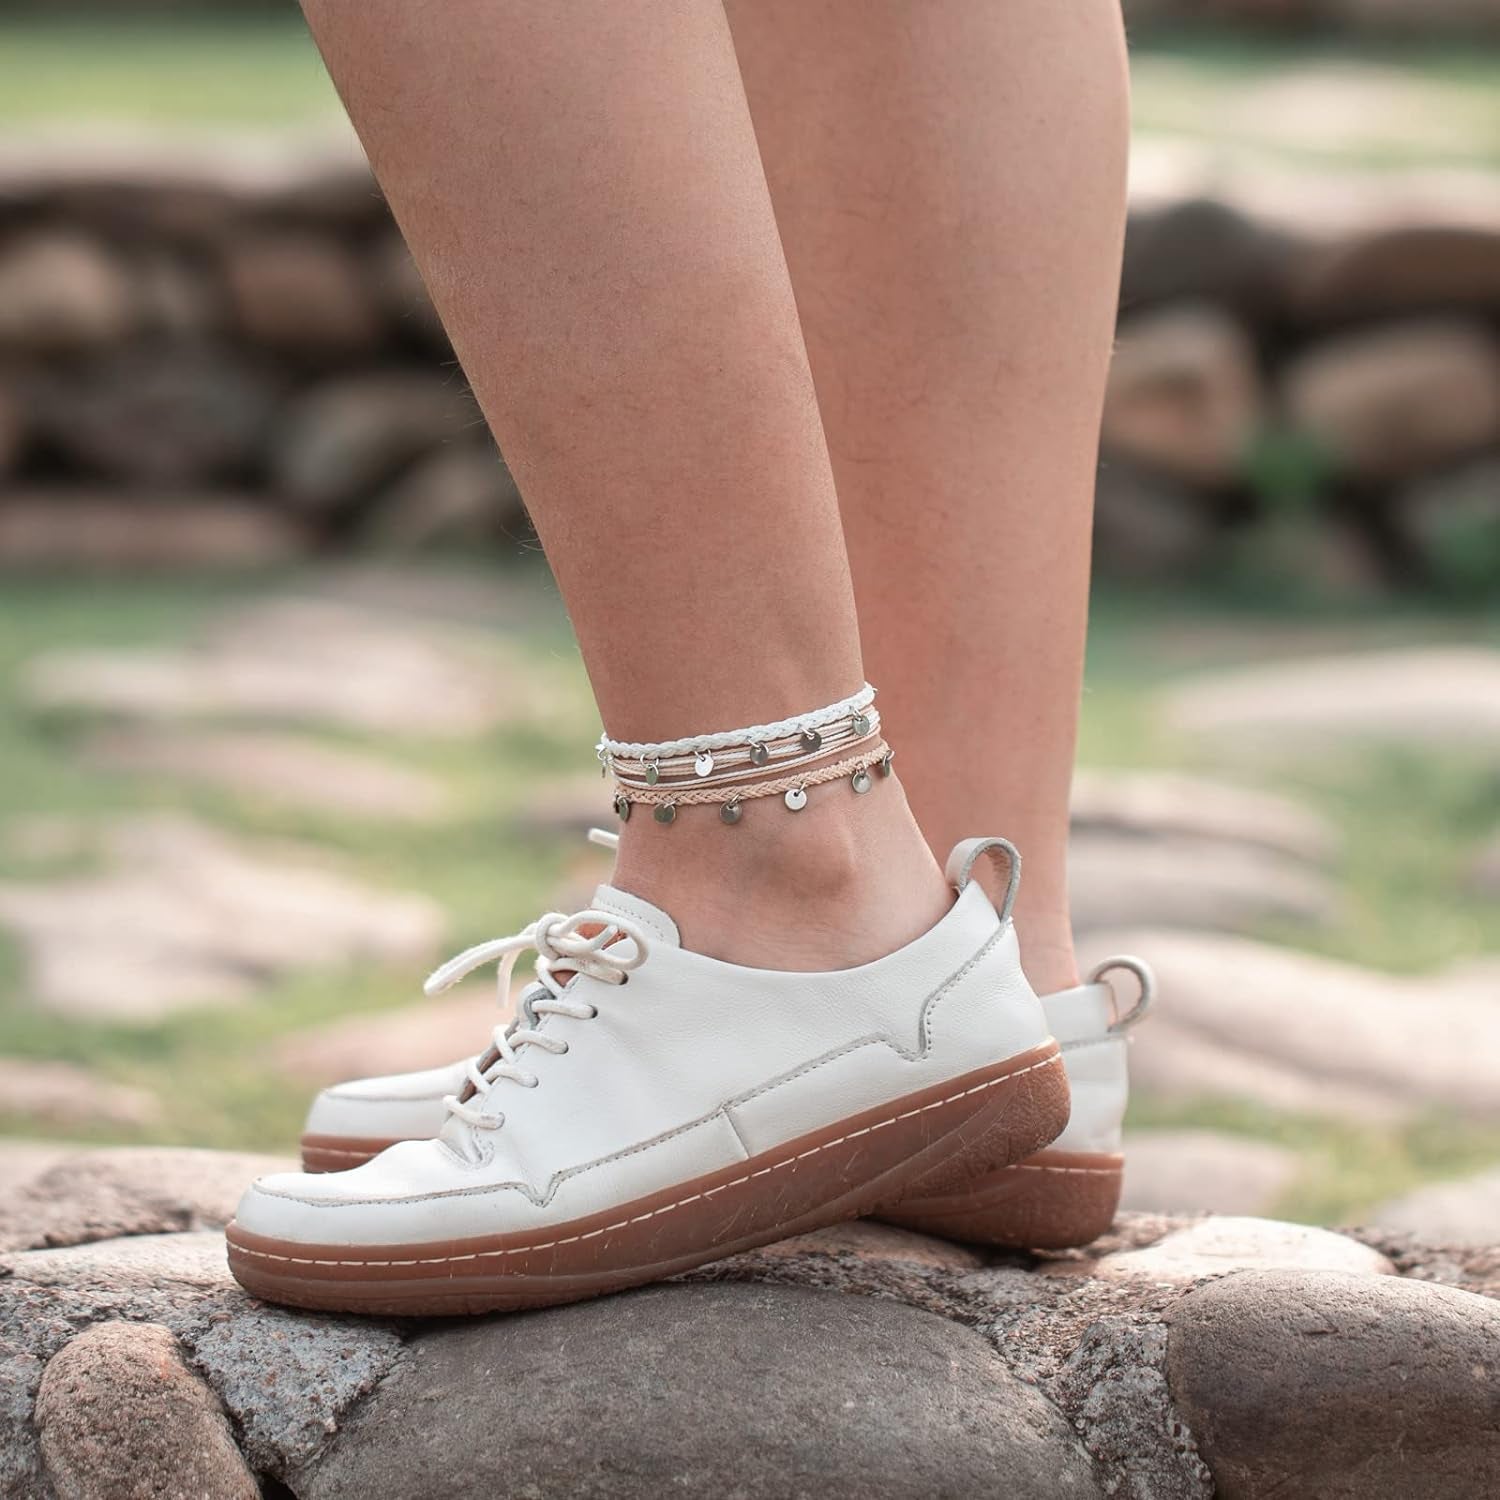 String Ankle Bracelets Waterproof Rope Anklets Braided Beach Boho Coin Anklets Cute Friendship Foot Jewelry for Women Teen Girls